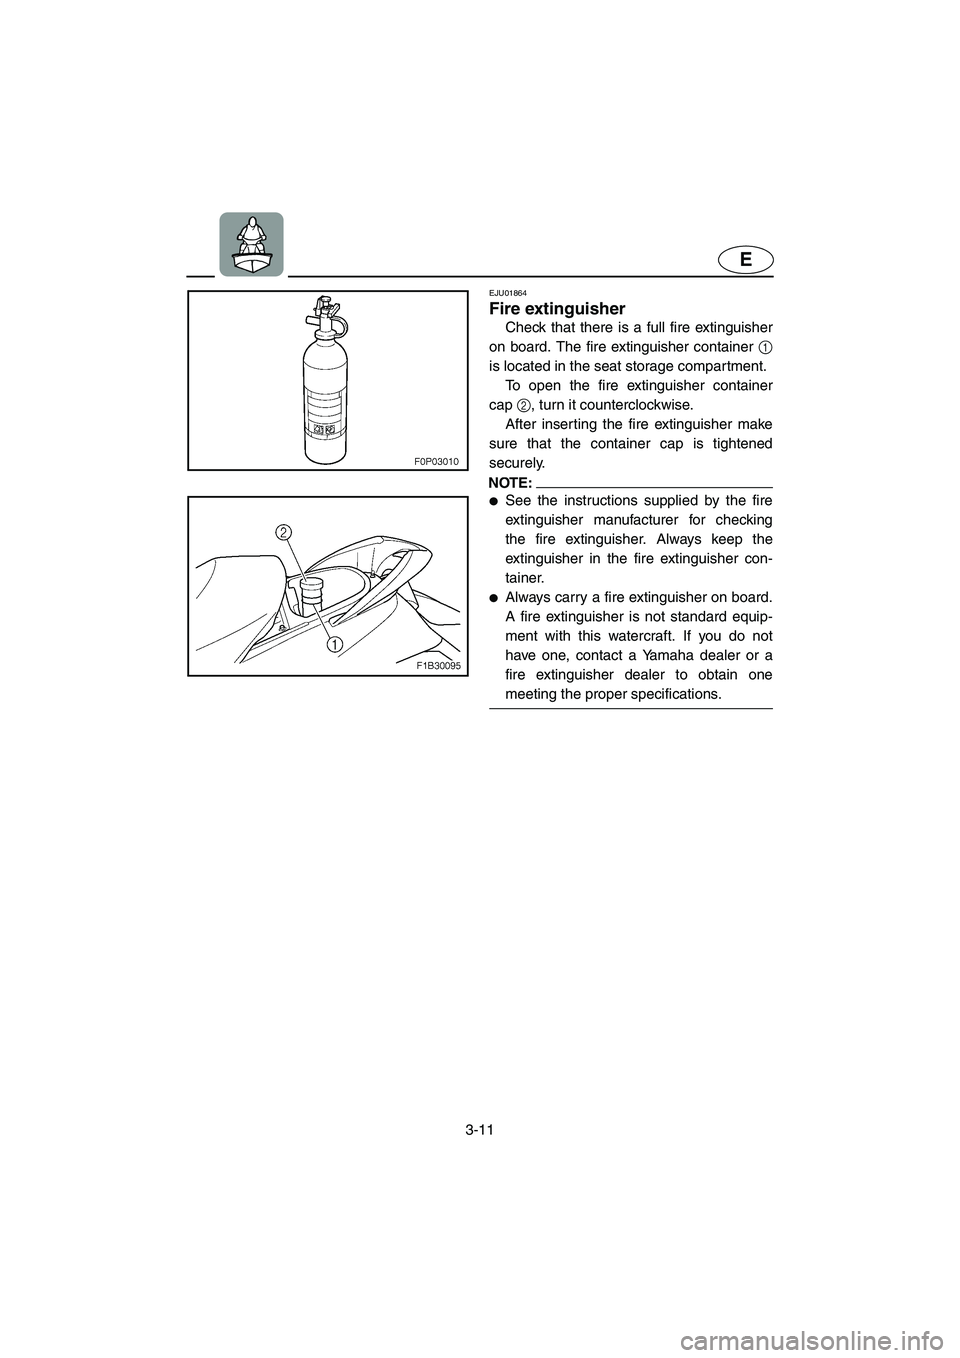 YAMAHA FX CRUISER 2006 Repair Manual 3-11
E
EJU01864
Fire extinguisher 
Check that there is a full fire extinguisher
on board. The fire extinguisher container 1
is located in the seat storage compartment. 
To open the fire extinguisher c